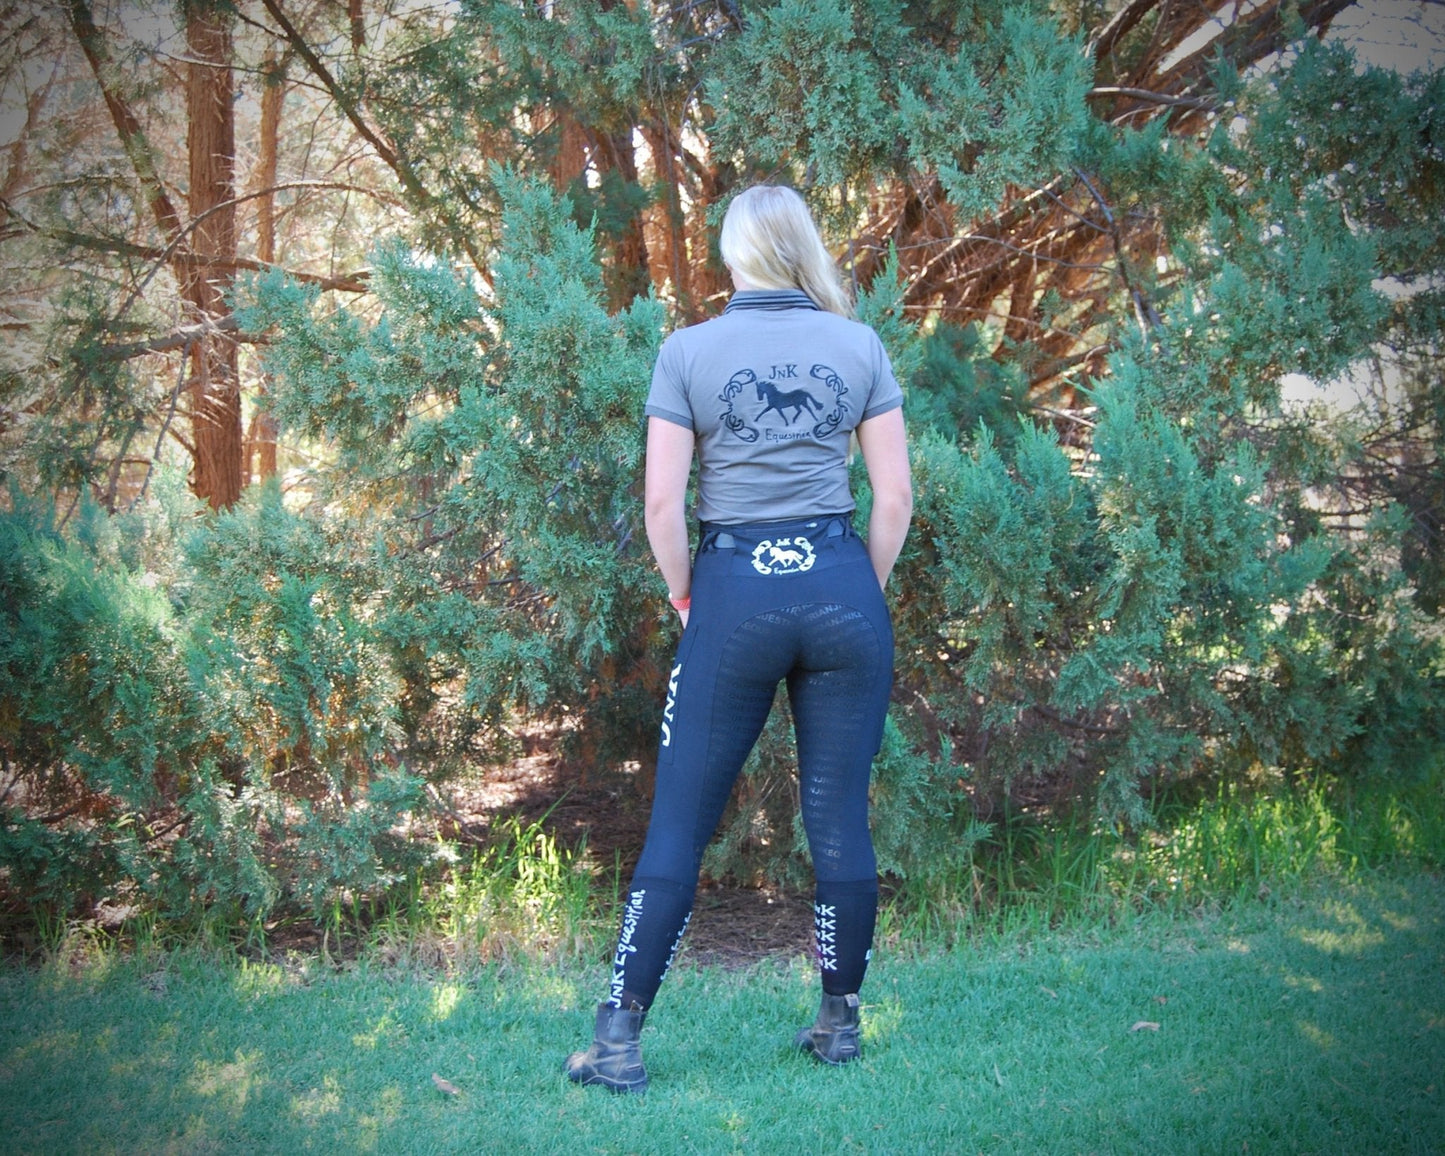 Rider in horse riding tights standing outdoors near coniferous trees.